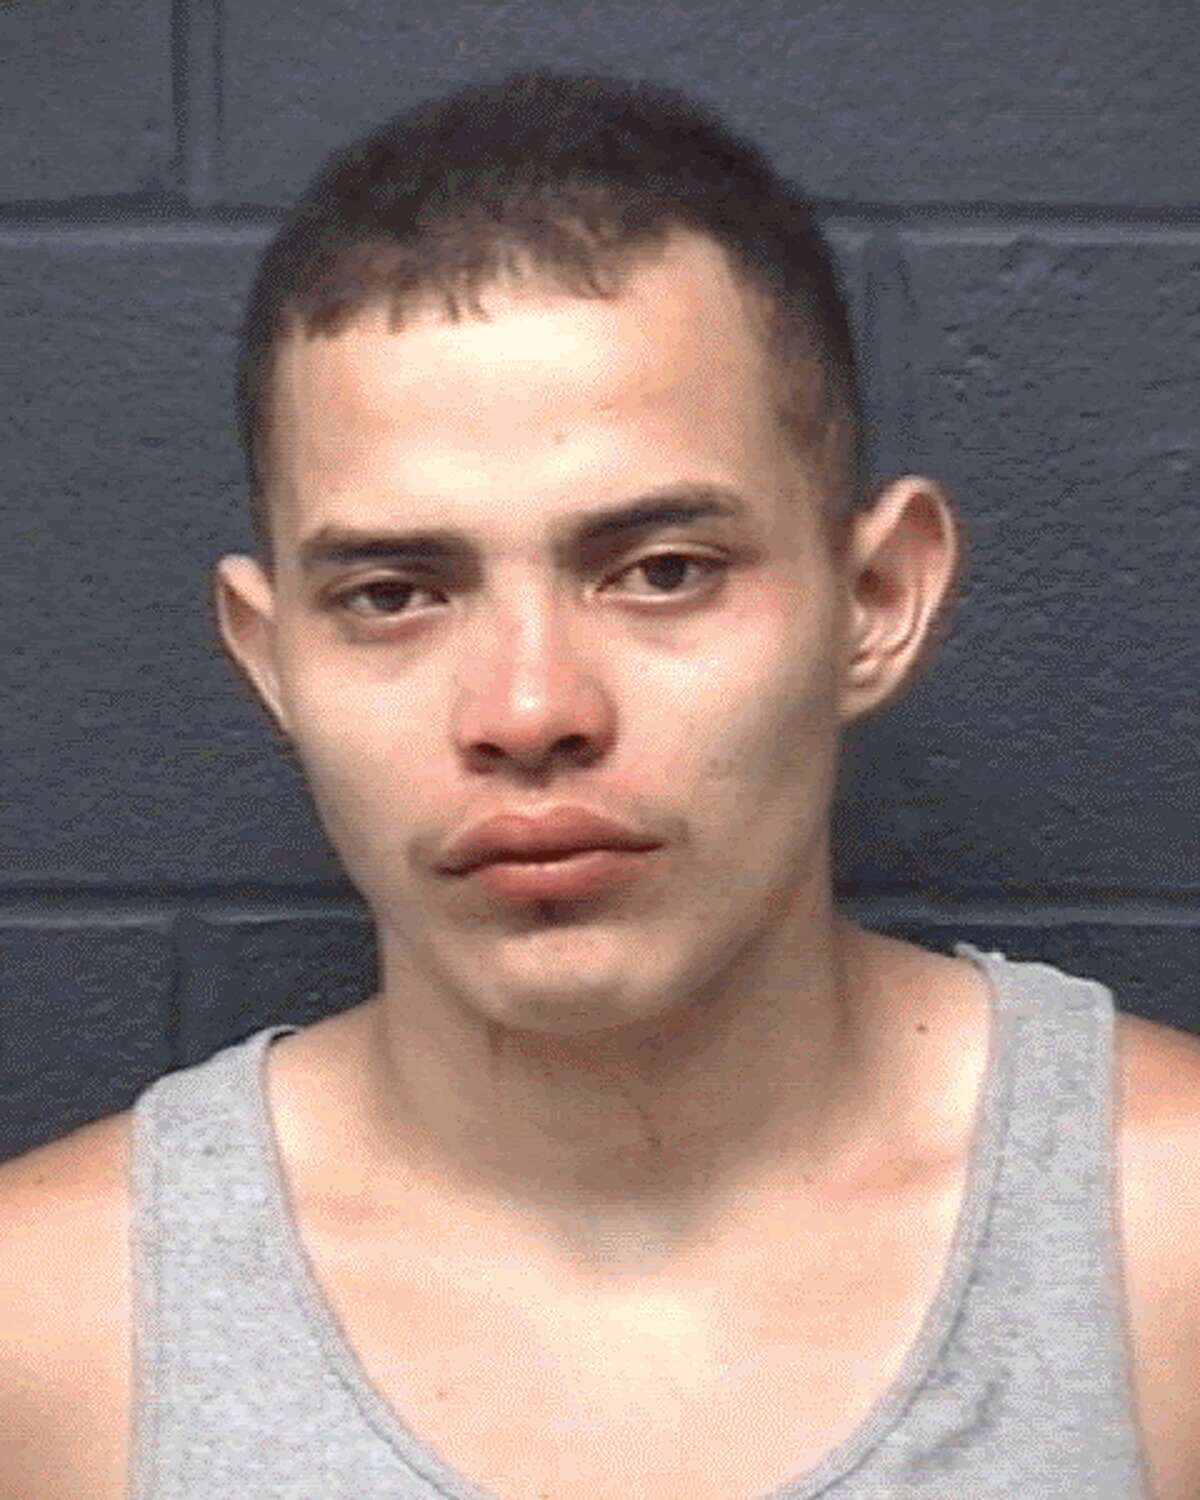 GARCIA, CESAR (W M) (26) years of age was arrested on the charge of ASSAULT CAUSES BODILY INJURY FAMILY VIOLENCE (M), at 414 CENTER RD, at 1441 hours on 1/9/2017